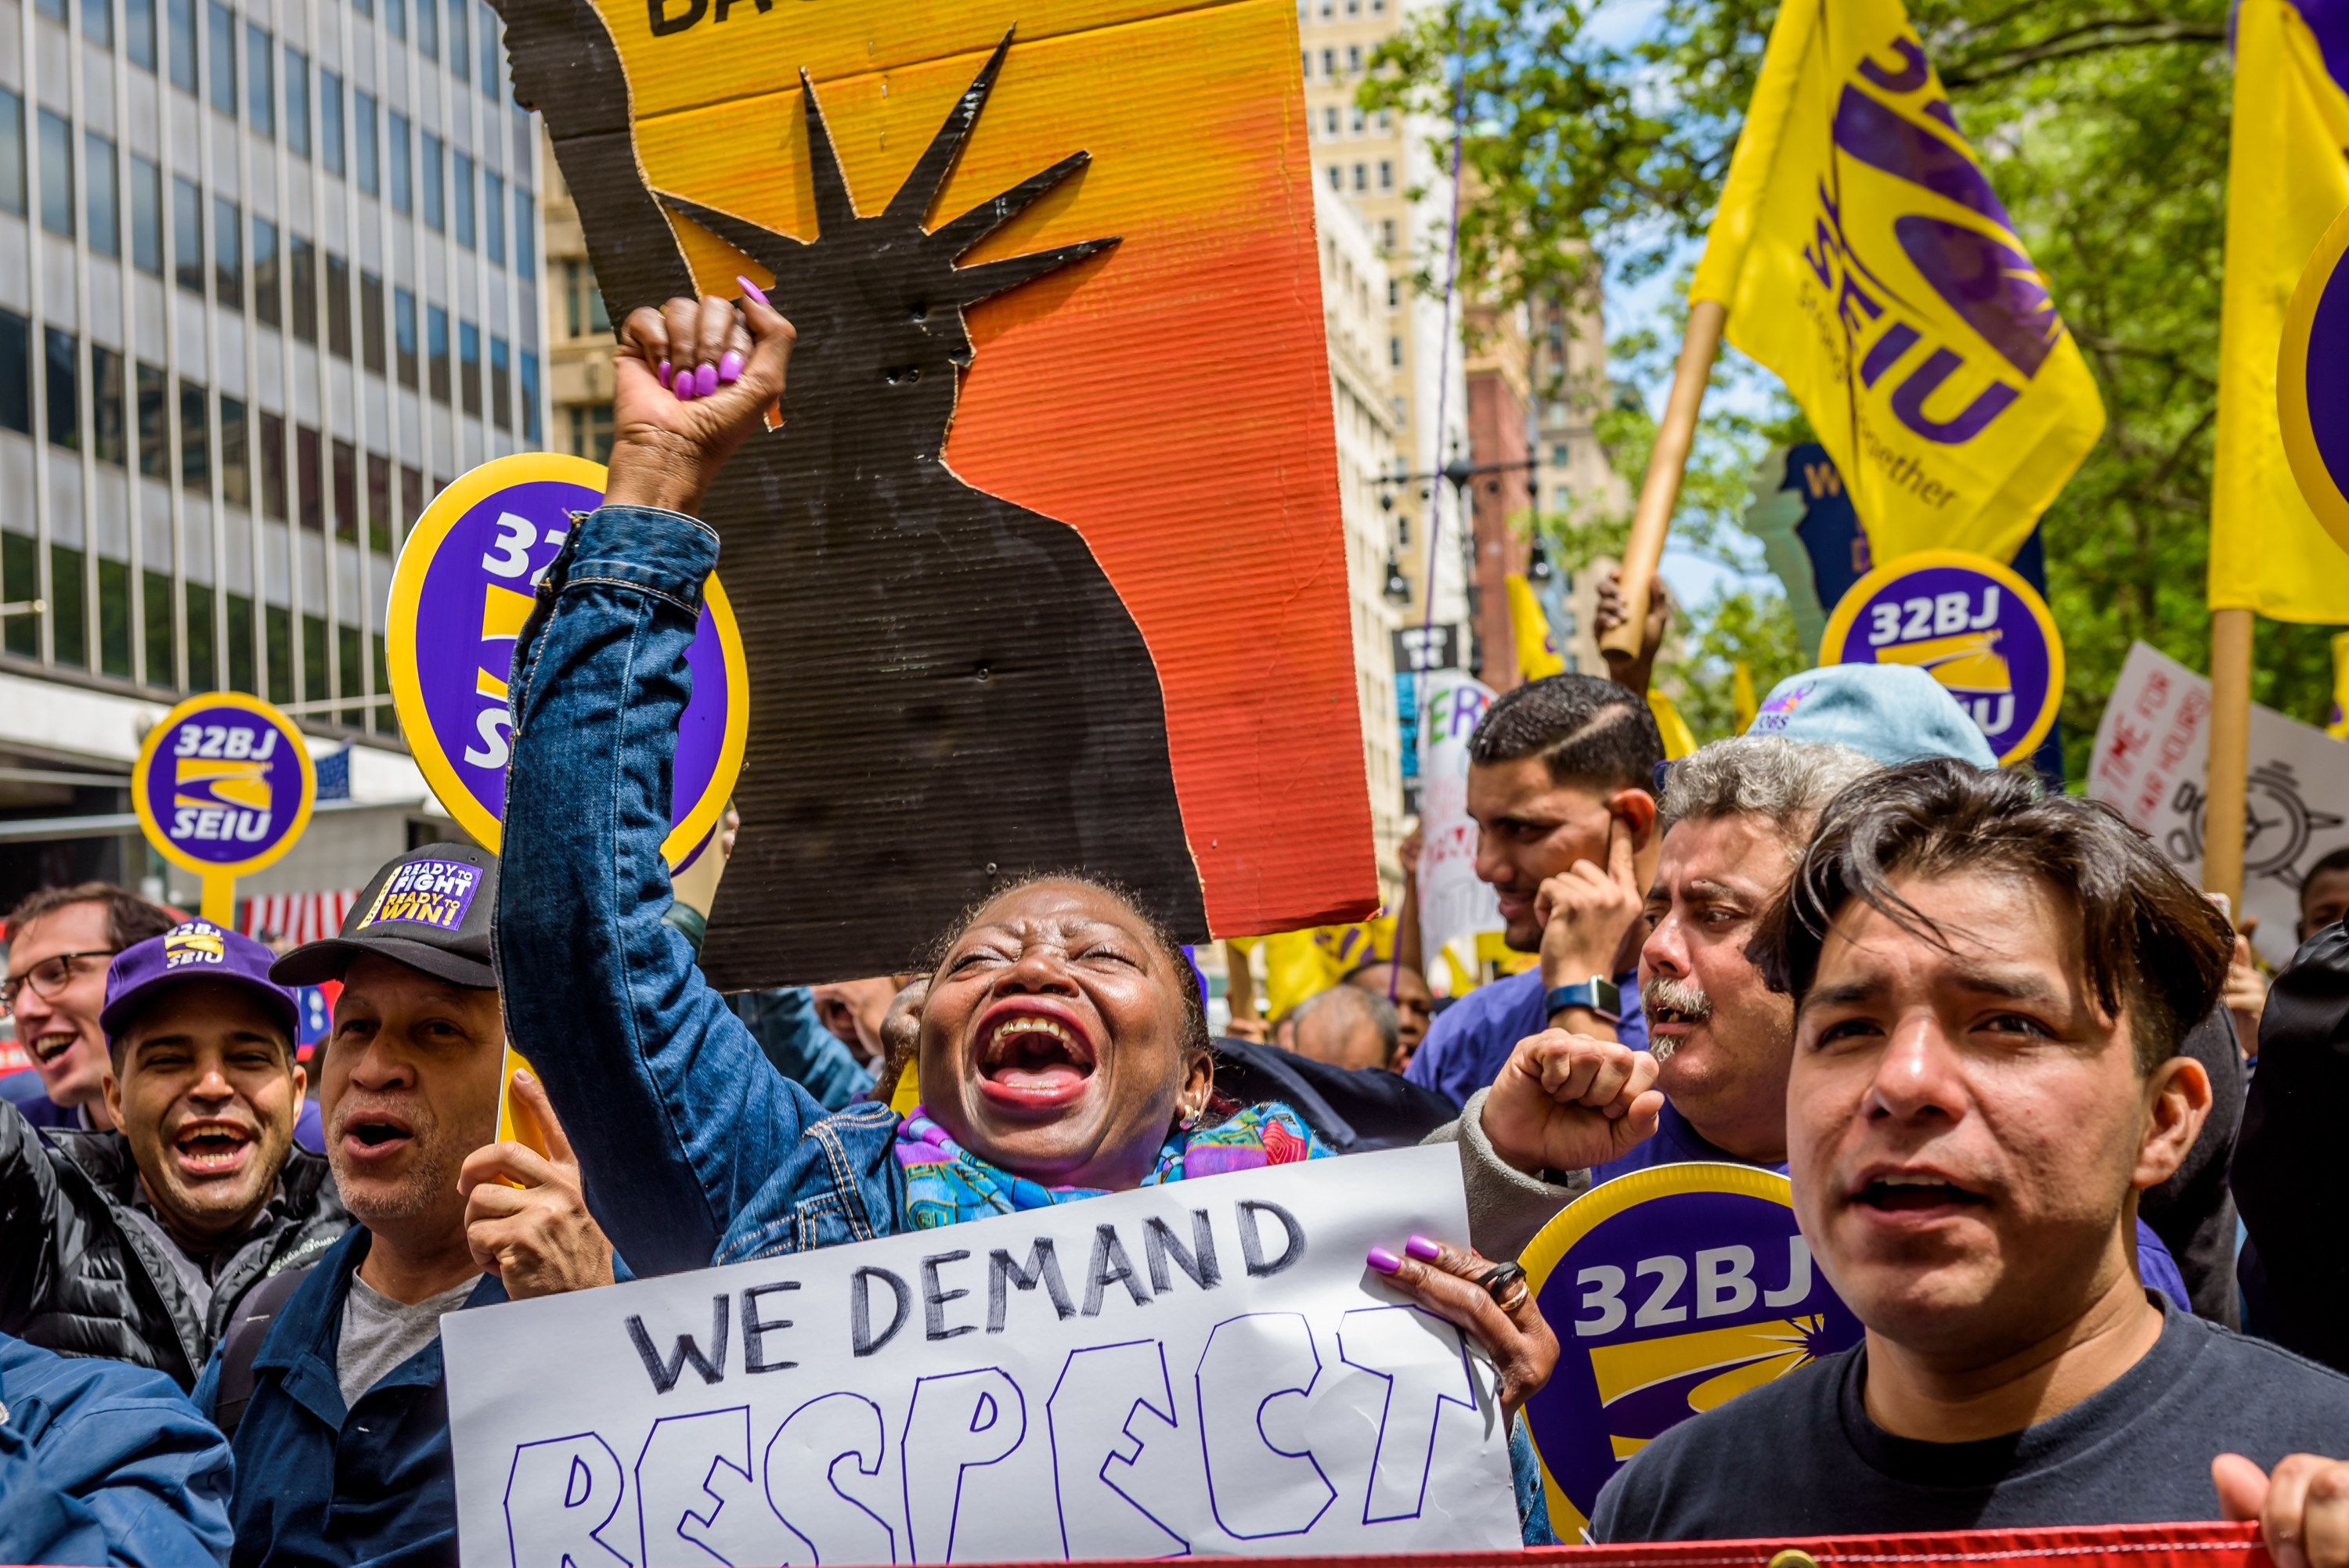 Fast food workers marching with a sign that says we demand respect